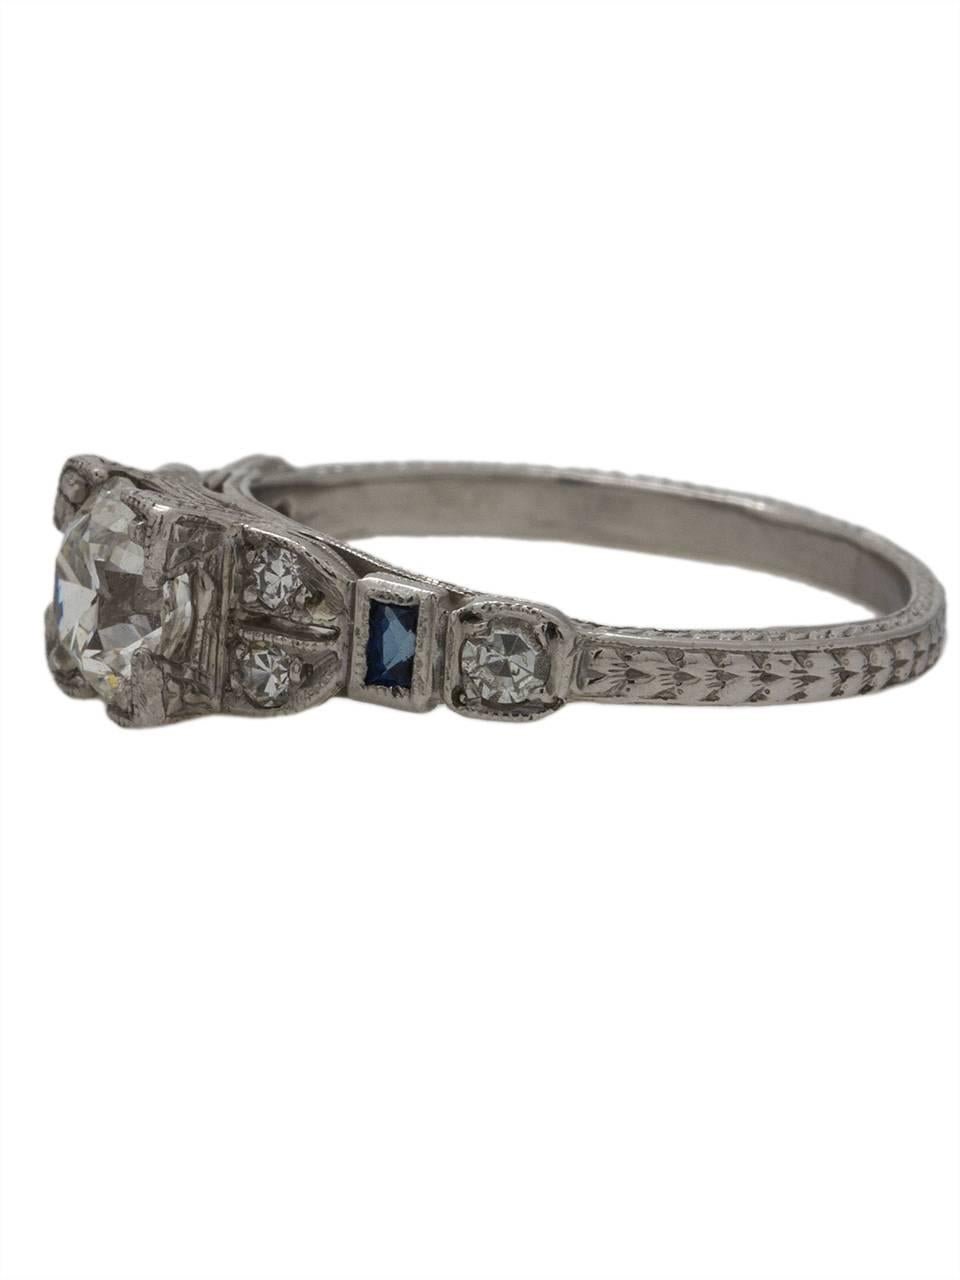 This intricately engraved engagement ring features an exquisitely cut 0.71ct Old European Cut diamond, H/VS2. Although this piece was recently manufactured in the 2000s, it was designed and crafted to look like an antique ring from the 1920s, and is